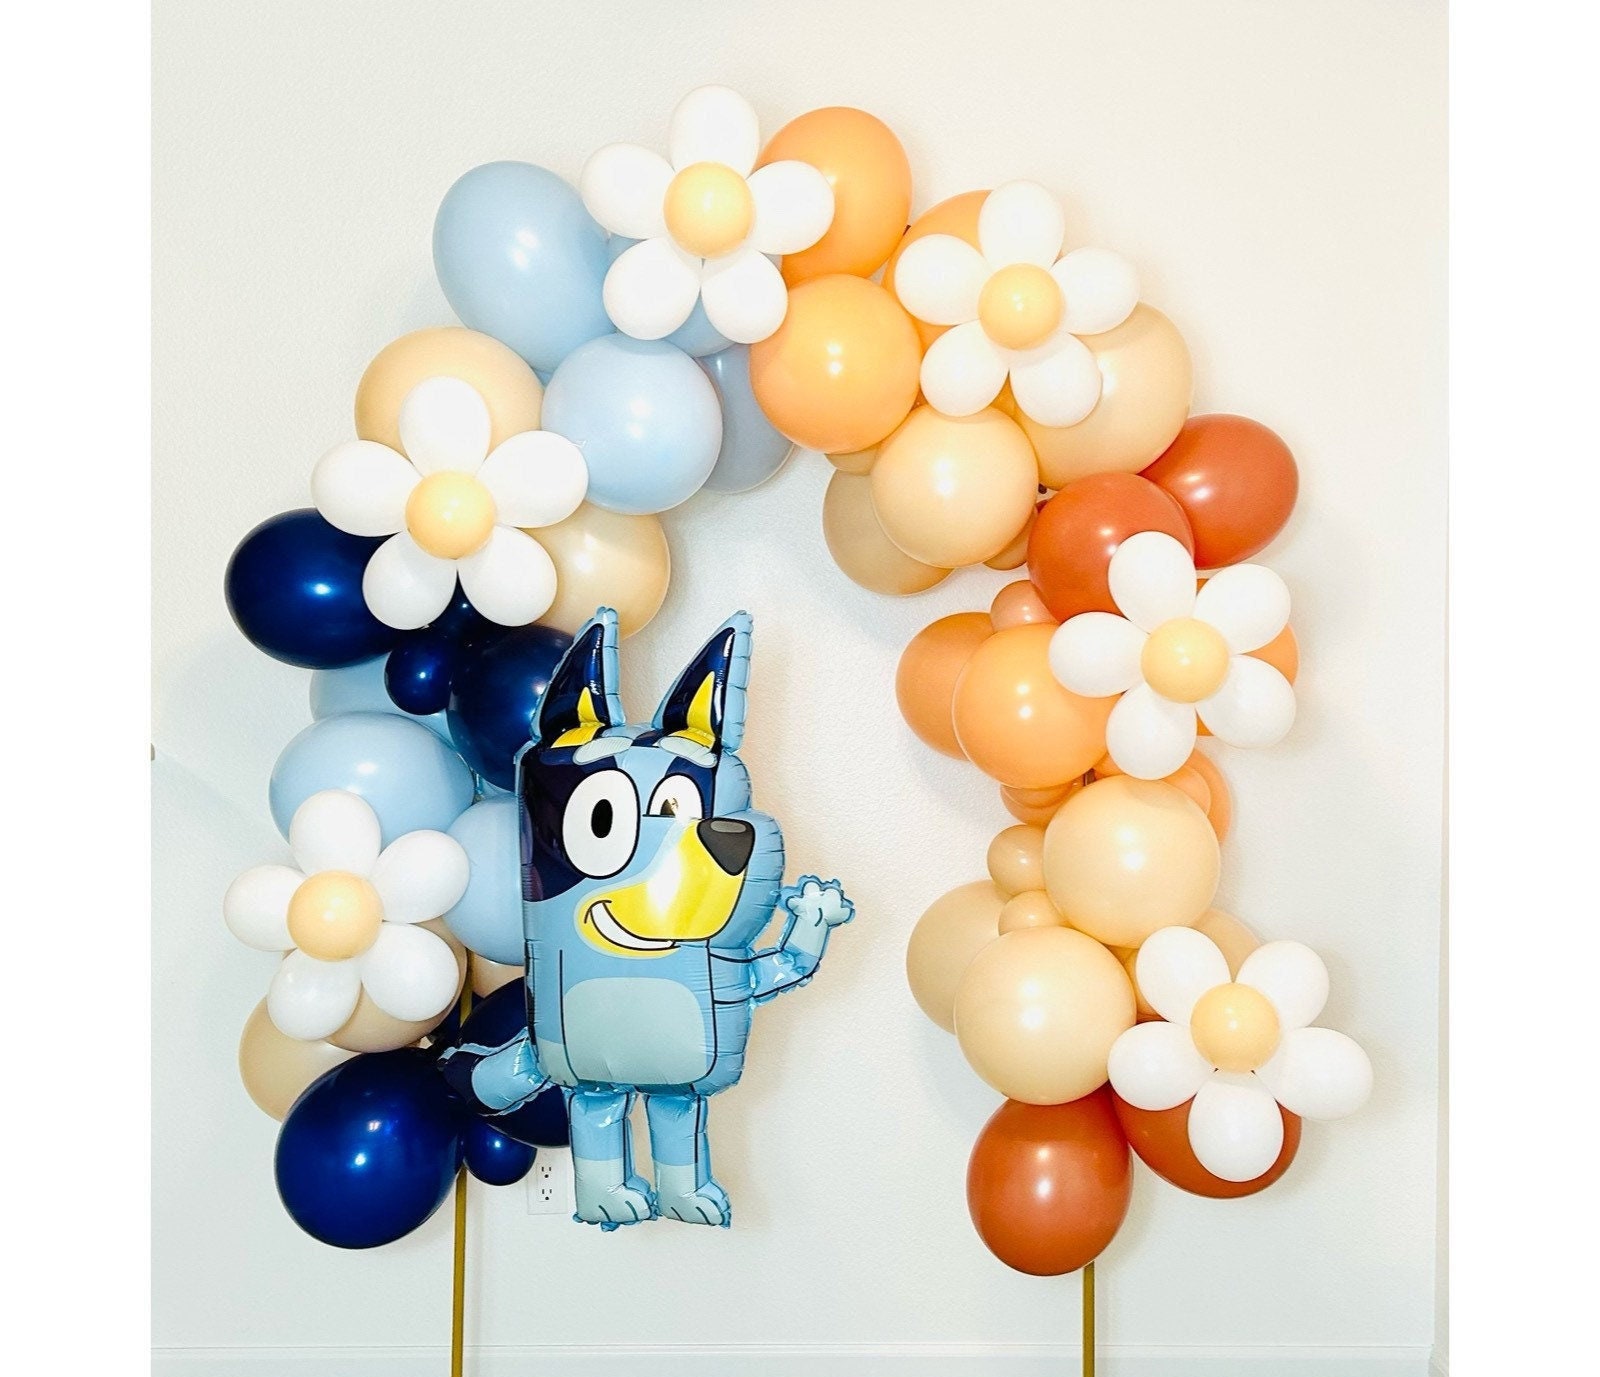 Bluey Birthday Party Supplies: Tableware and Decorations 